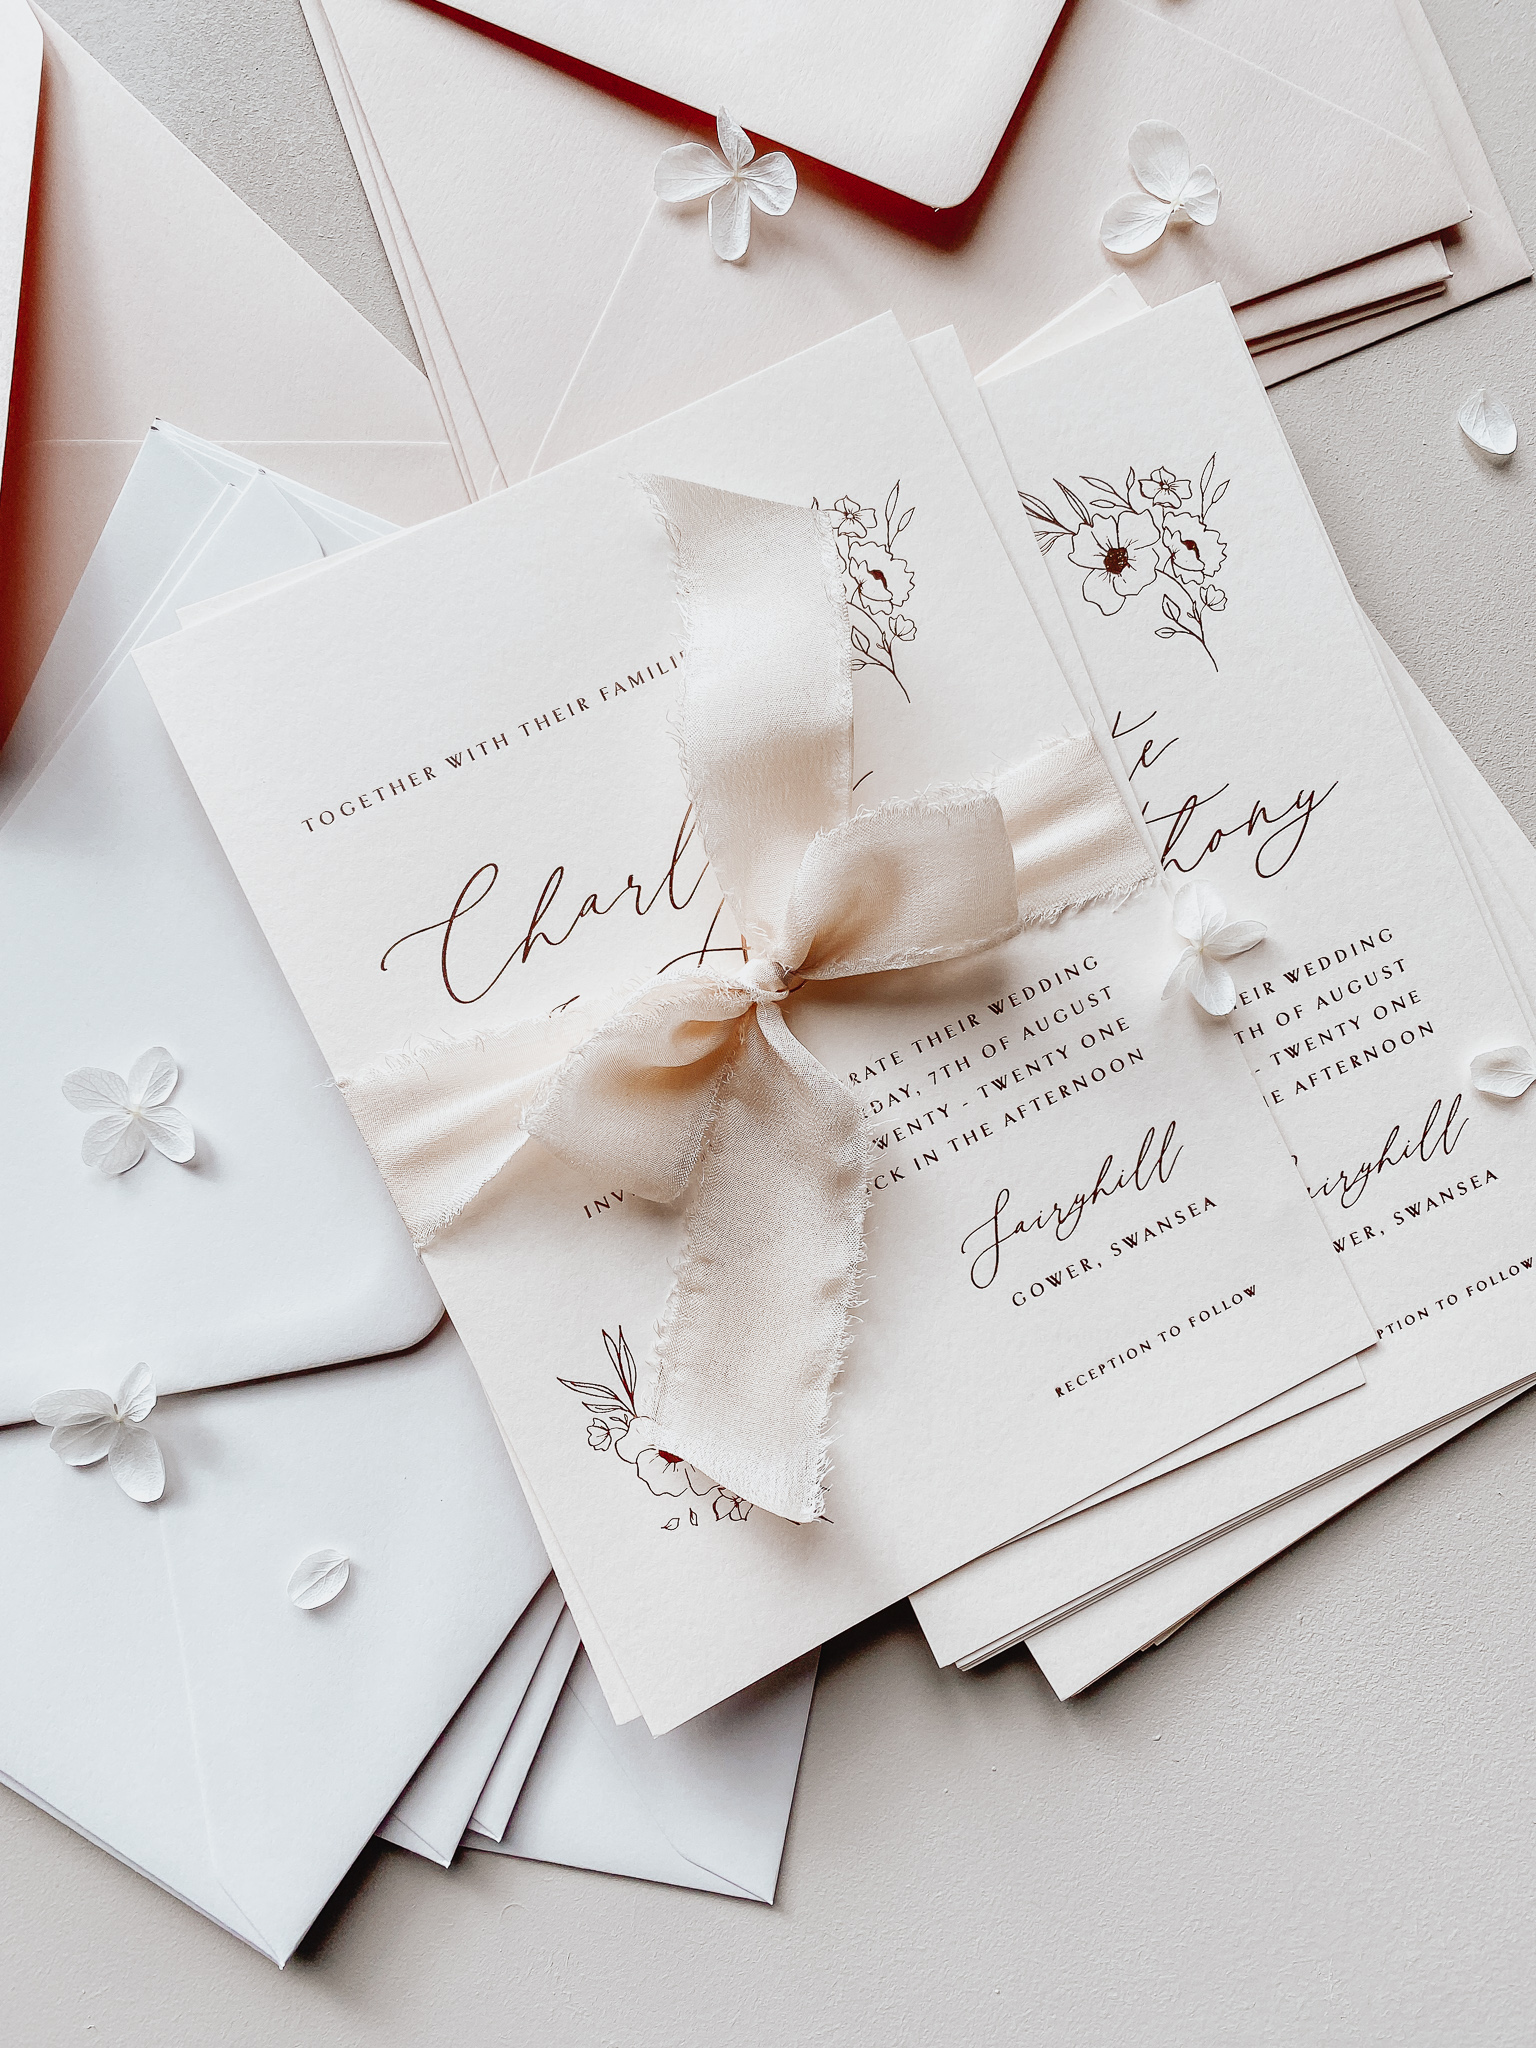 Rose gold hot foil press wedding invitations on nude blush card, finished with silk ribbon.